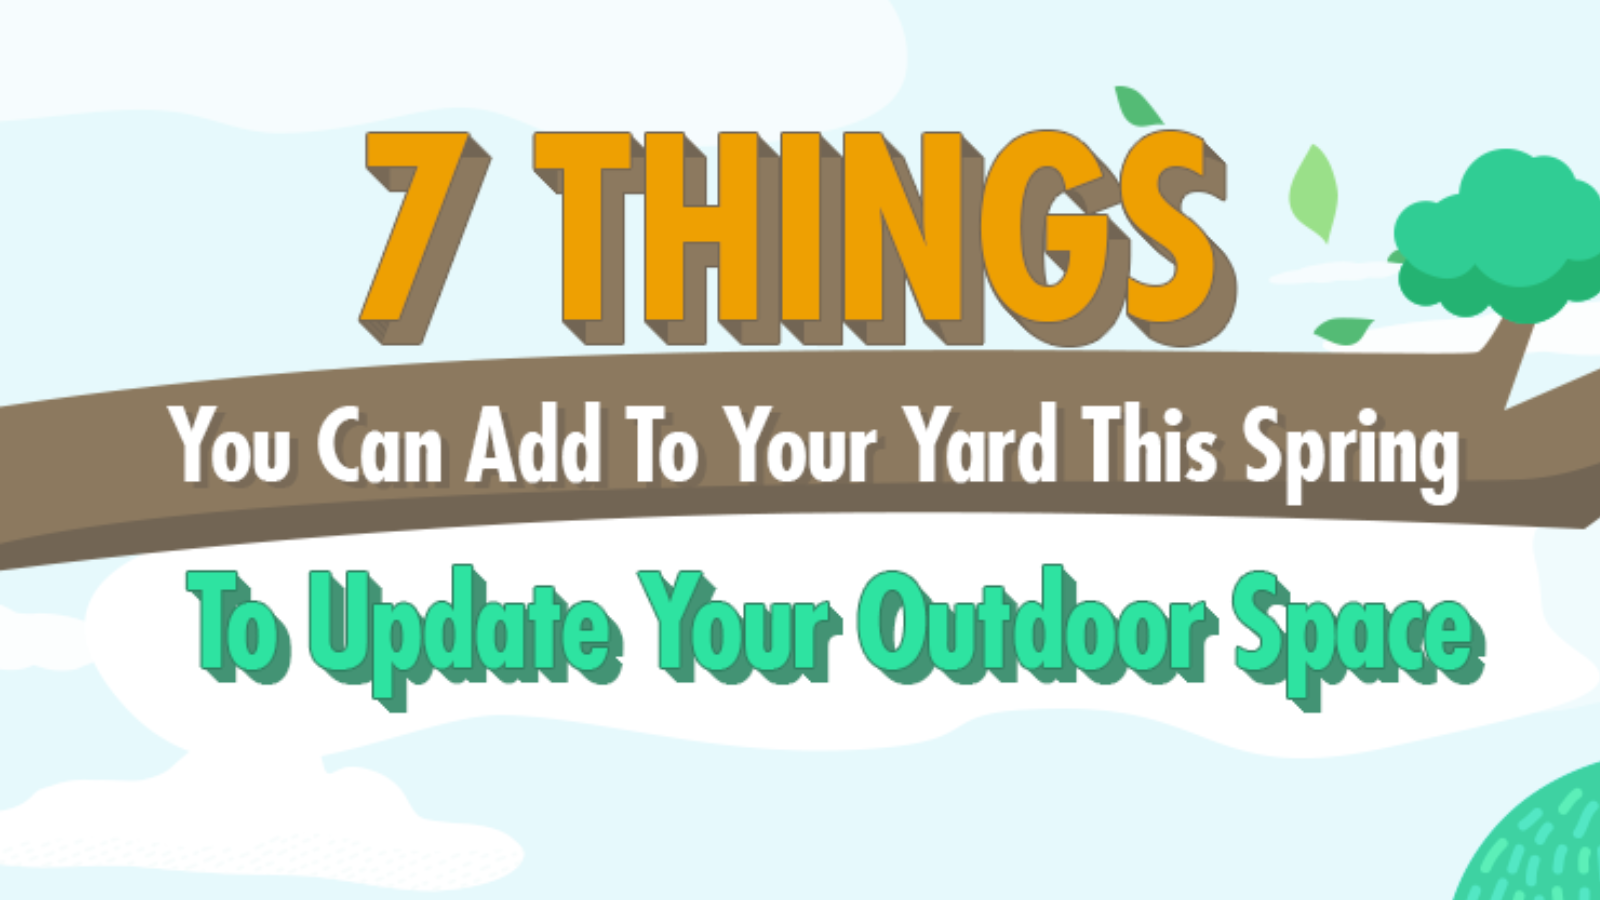 Make It Fab! 7 Things You Can Add To Your Yard This Spring If You're Looking To Update Your Outdoor Space